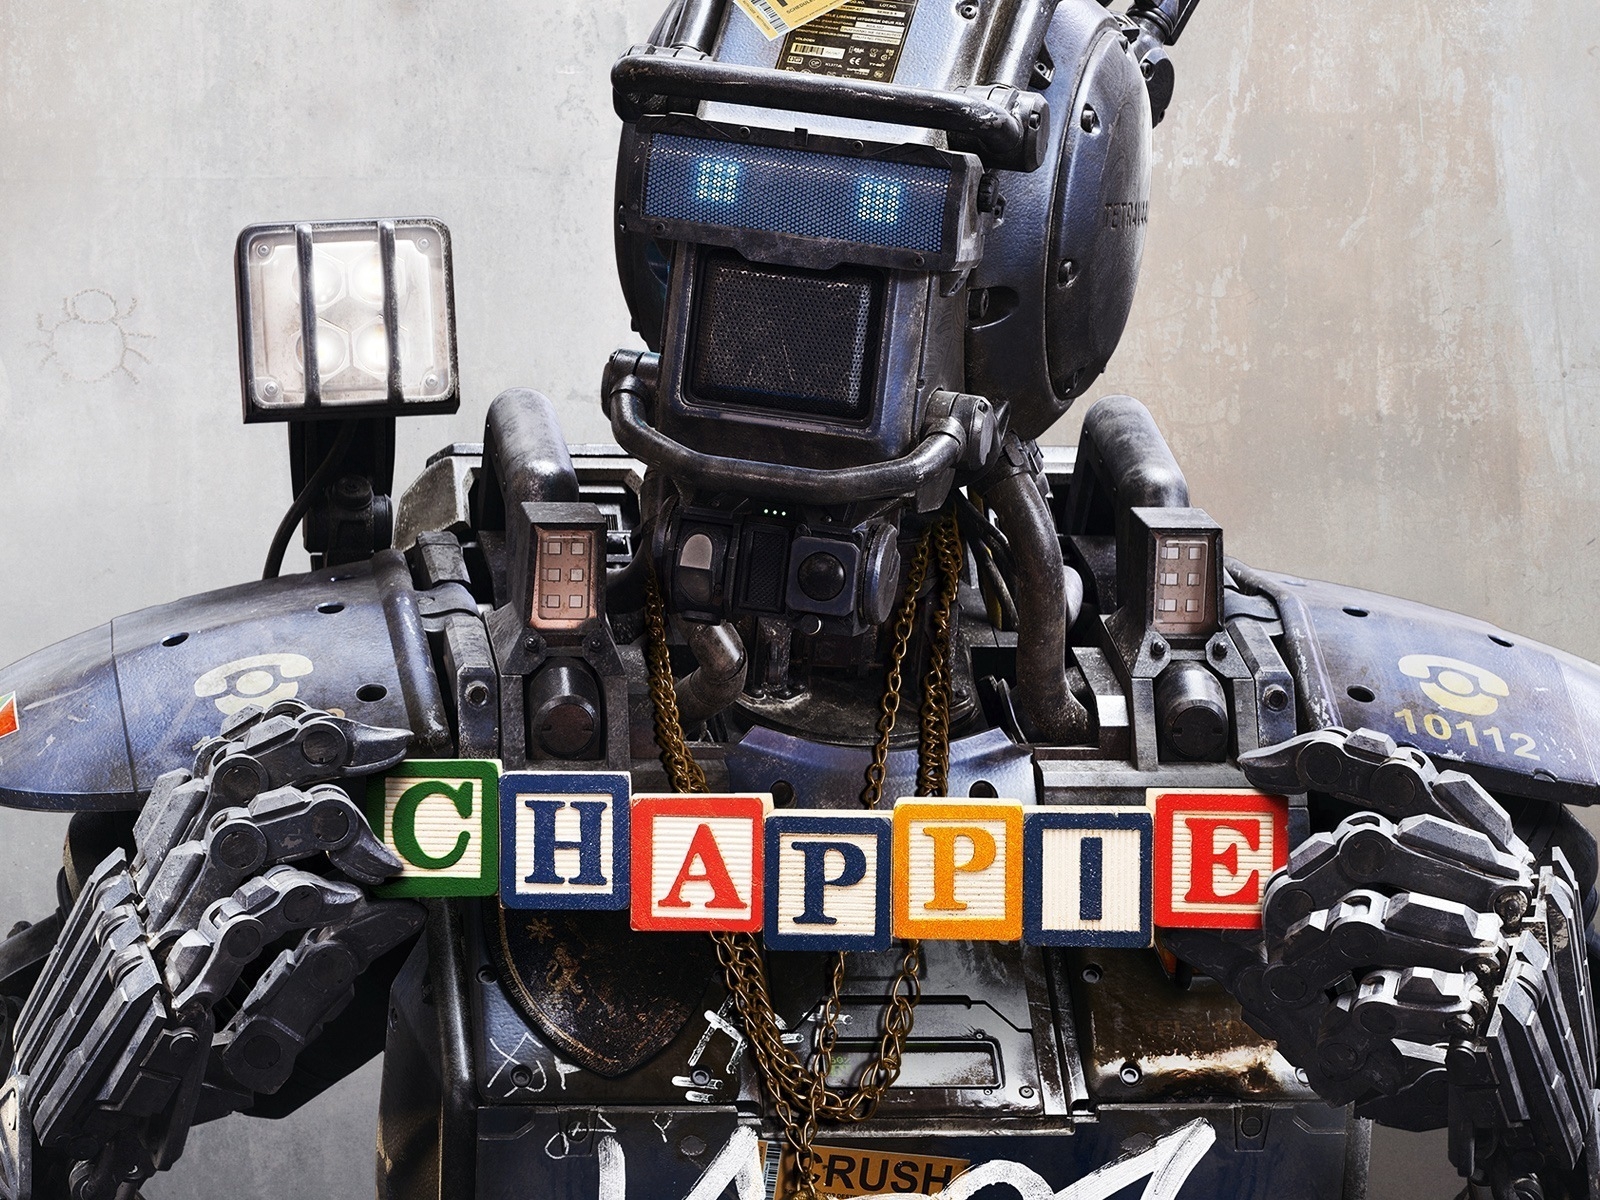 Chappie Robot for 1600 x 1200 resolution